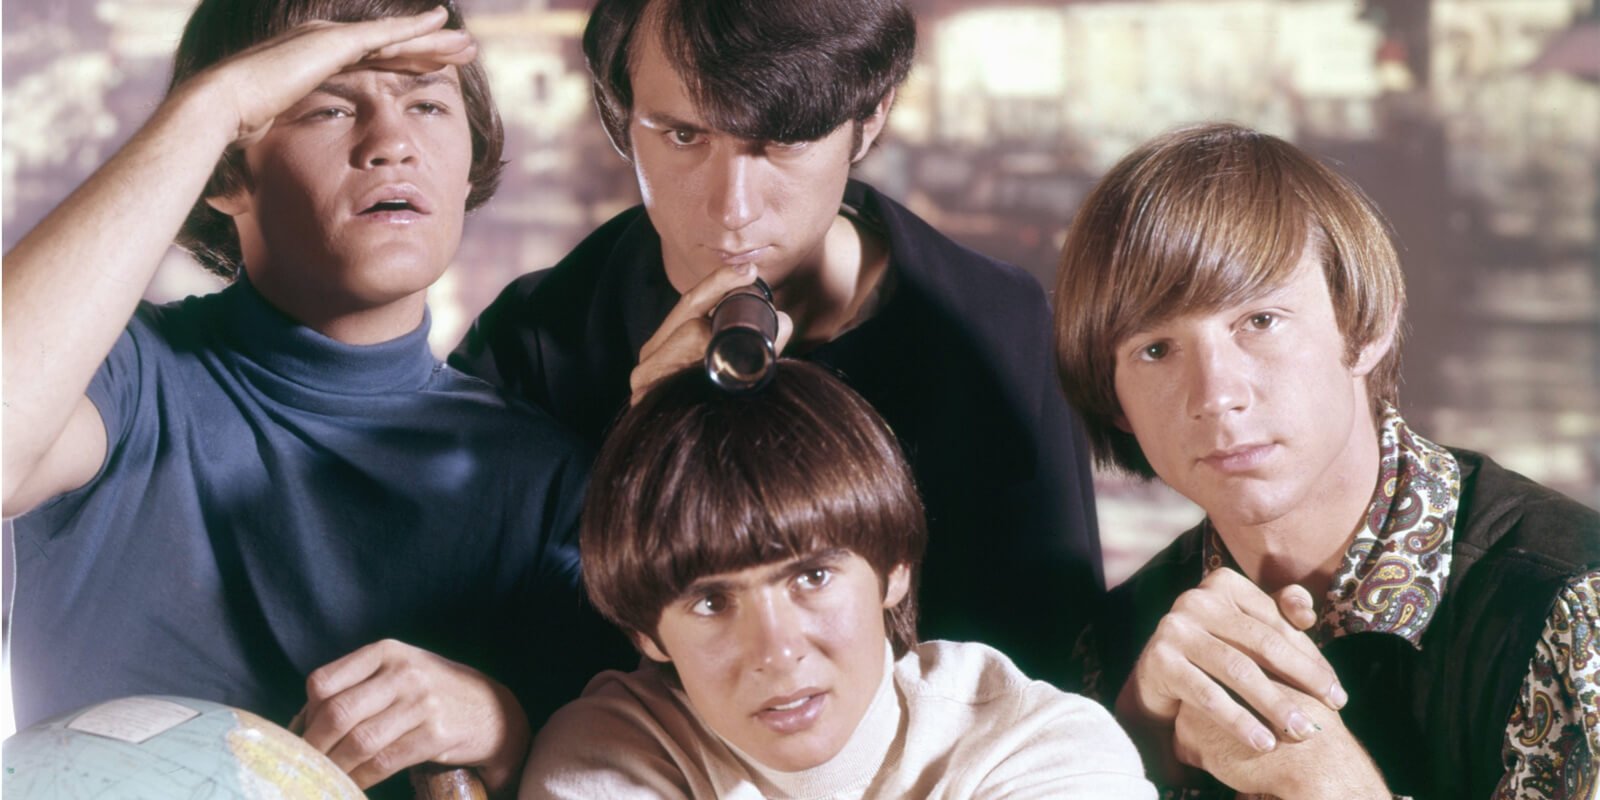 The Monkees members included Micky Dolenz, Davy Jones, Mike Nesmith, and Peter Tork.